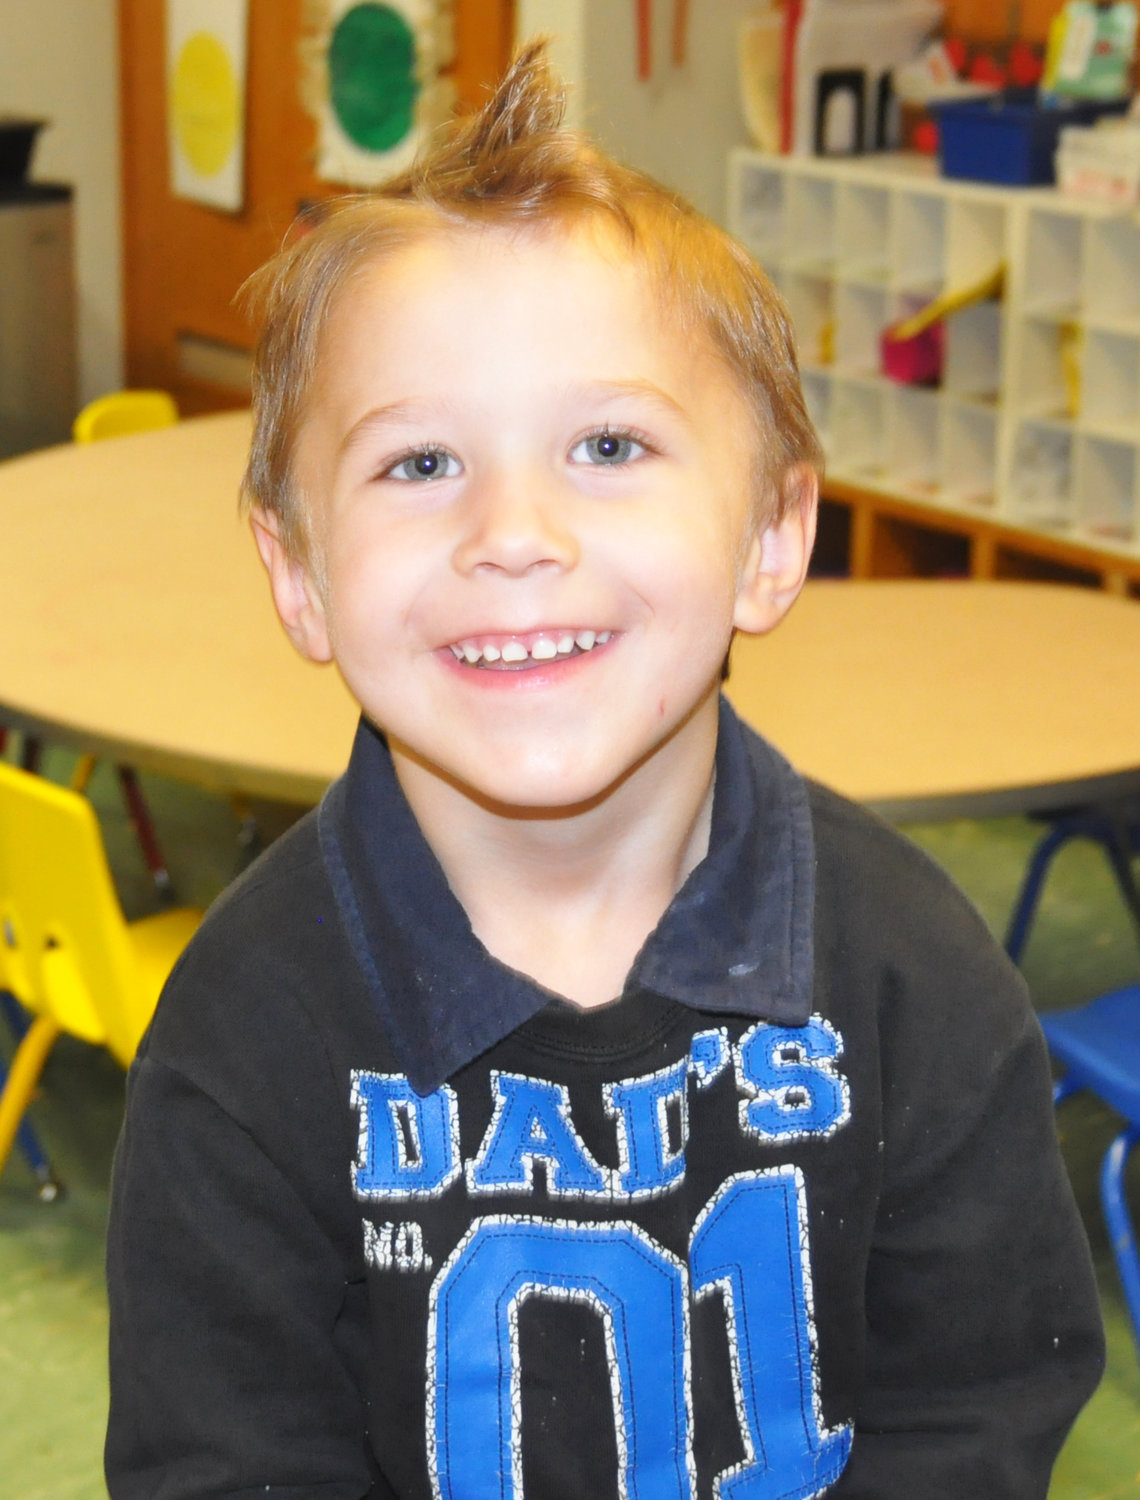 Bennington Farris smiling for a picture during free time at Willson Preschool in Ms. Rita's class.